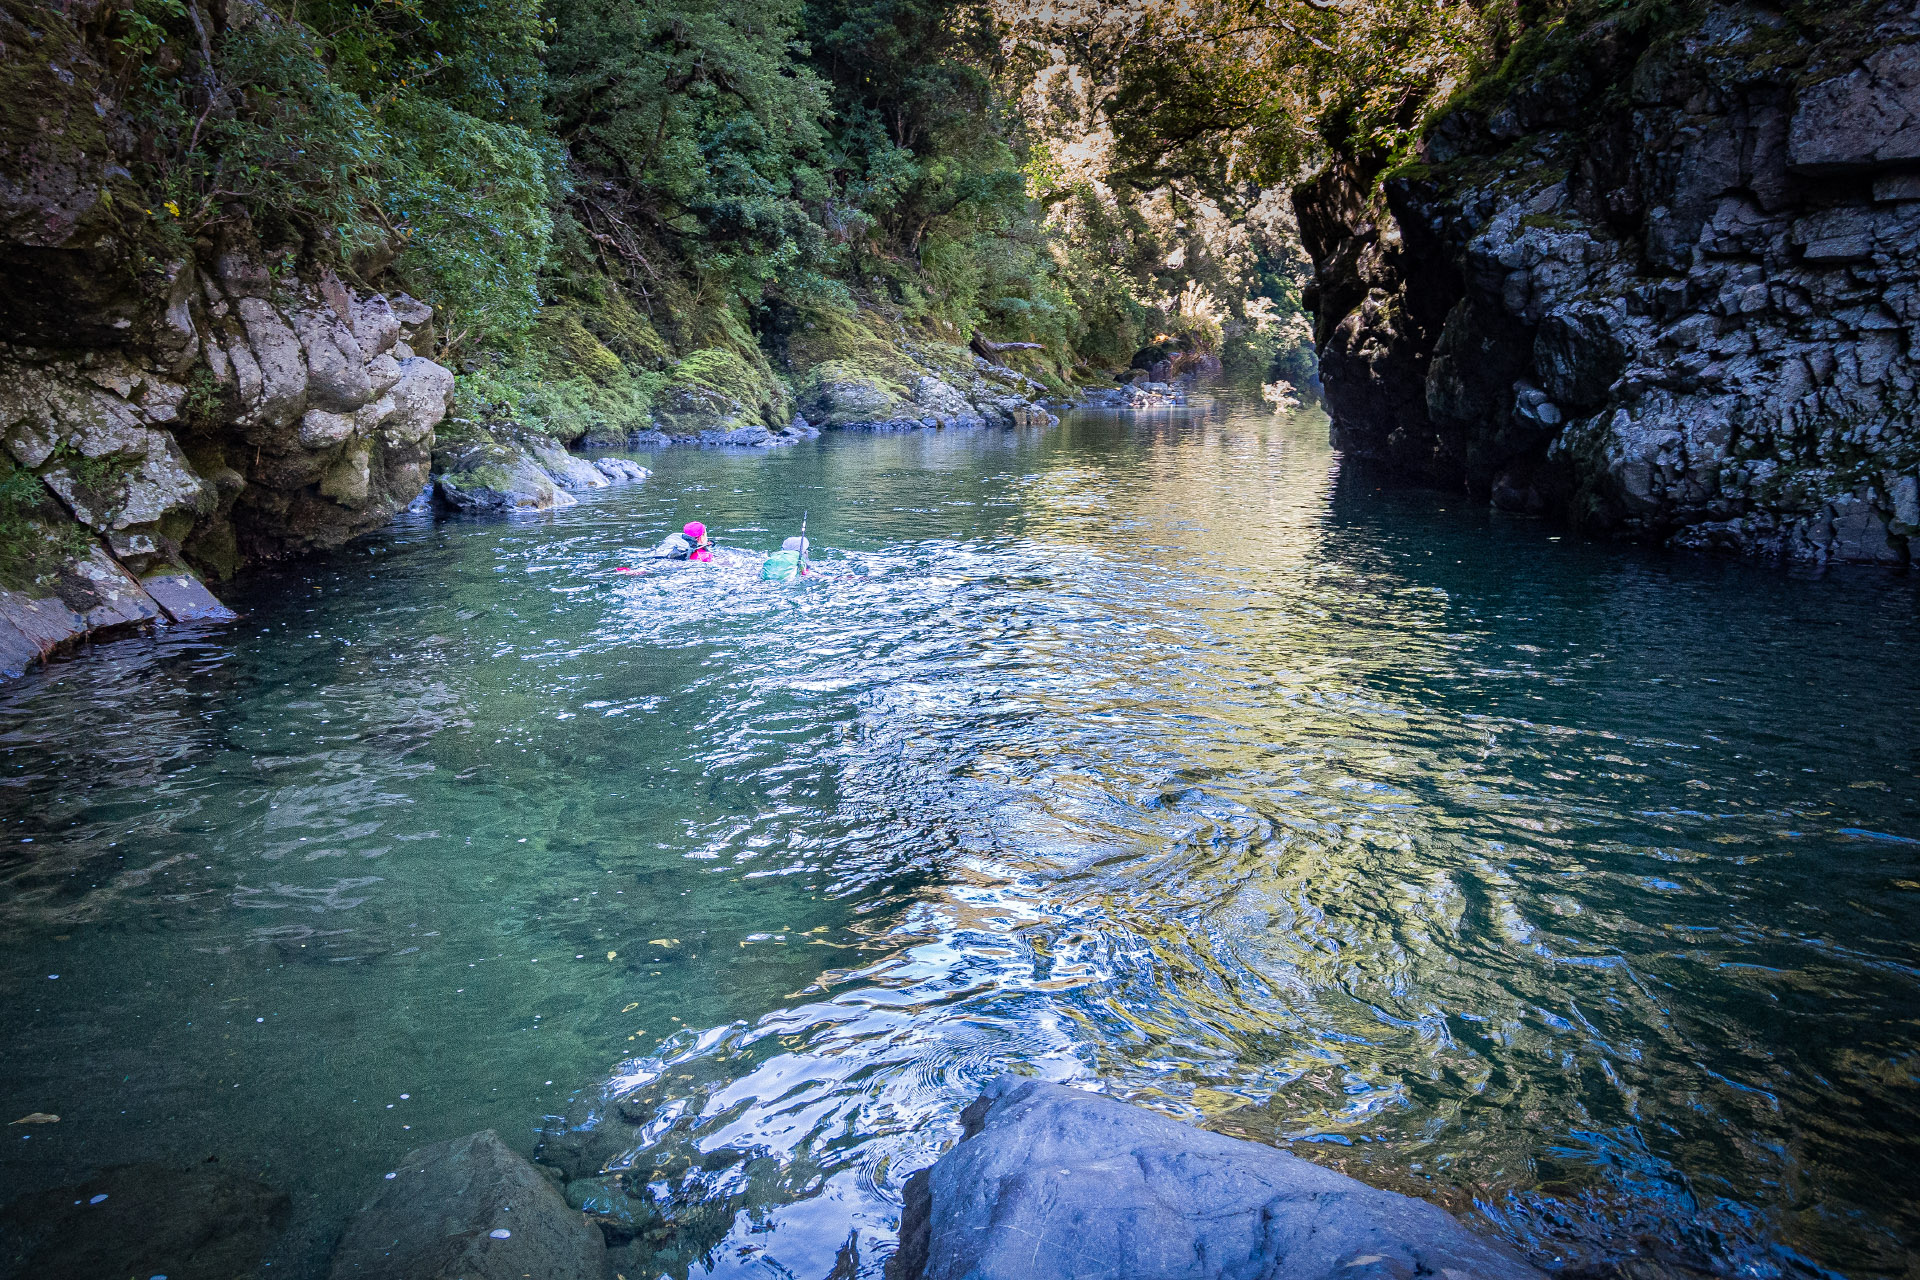 Swimming the Waiohine Gorge on a day tramp from Mid Waiohine Hut to Totara Flats